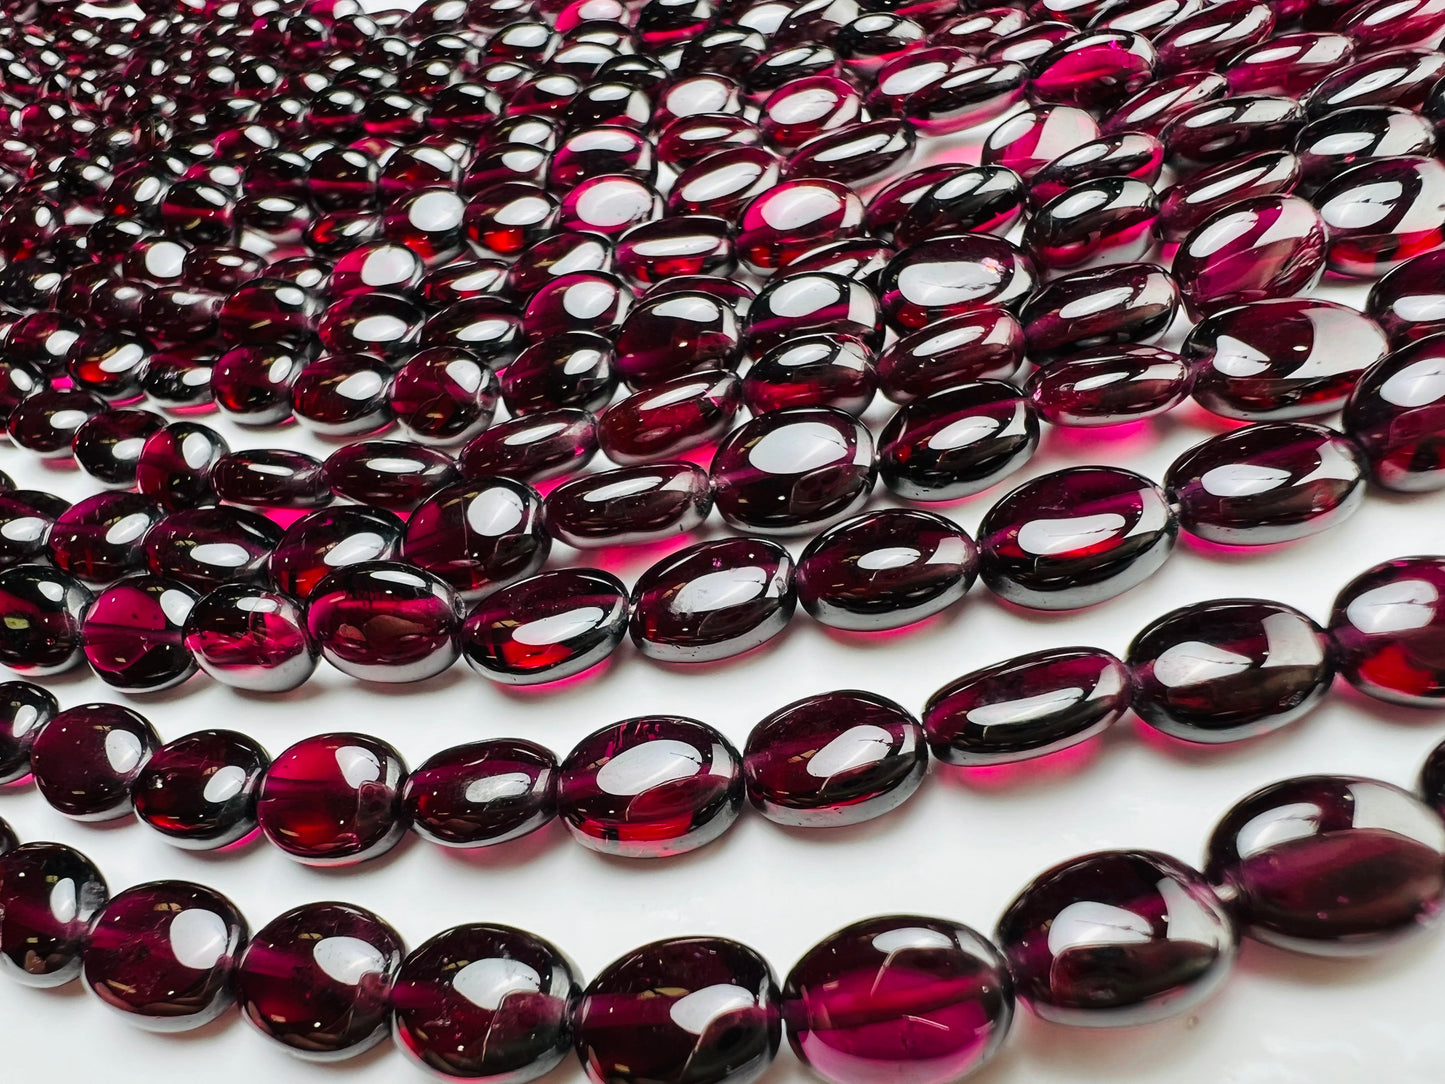 Mozambique Garnet AAA Smooth Oval 7x8-9mm Jewelry Making, Rich Merlot Natural Gemstone beads 8.5” strand . Single or bulk